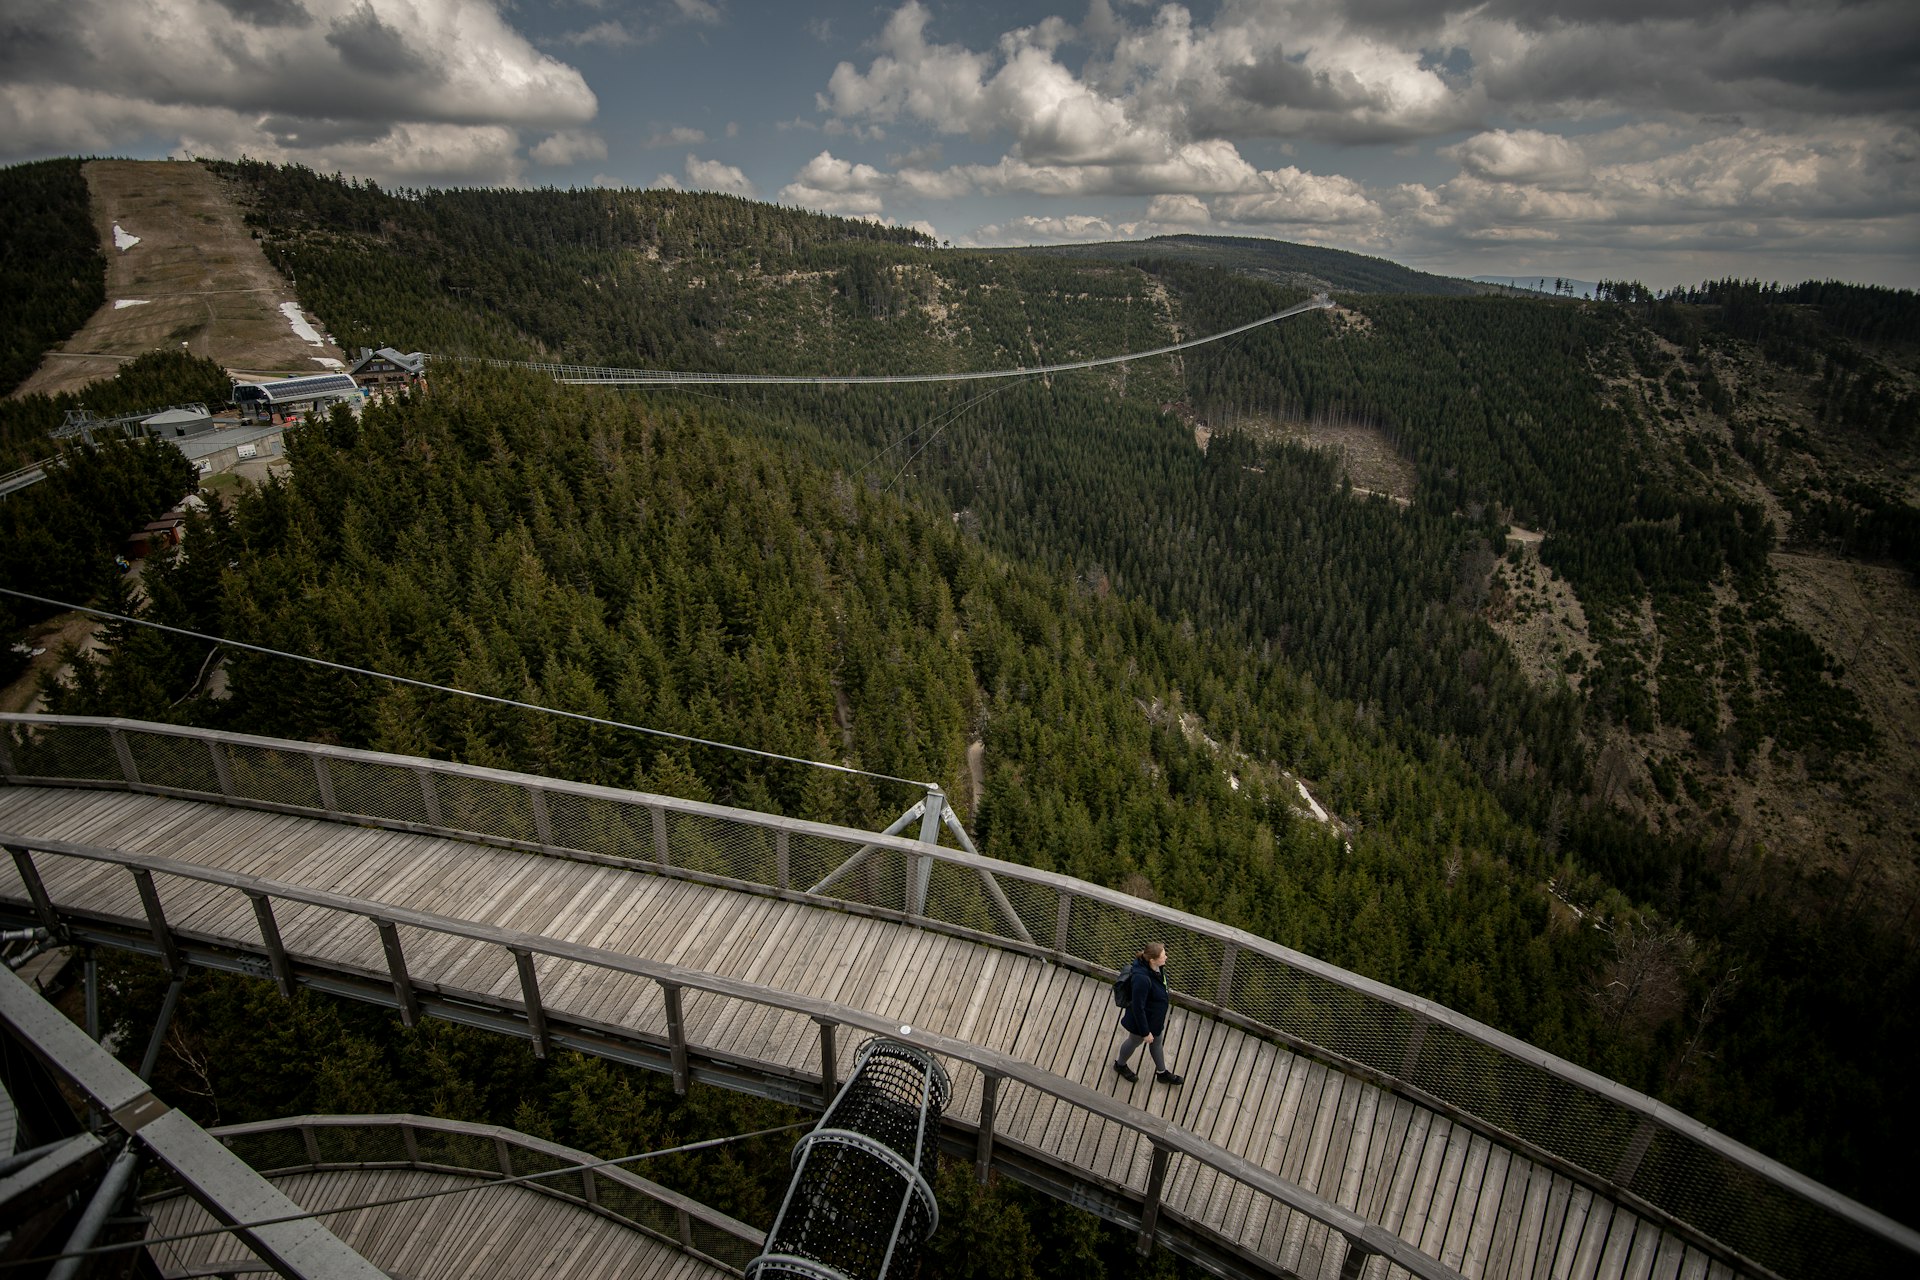 A visitor on Sky Walk with Sky Bridge 721 behind him in Czech Republic.